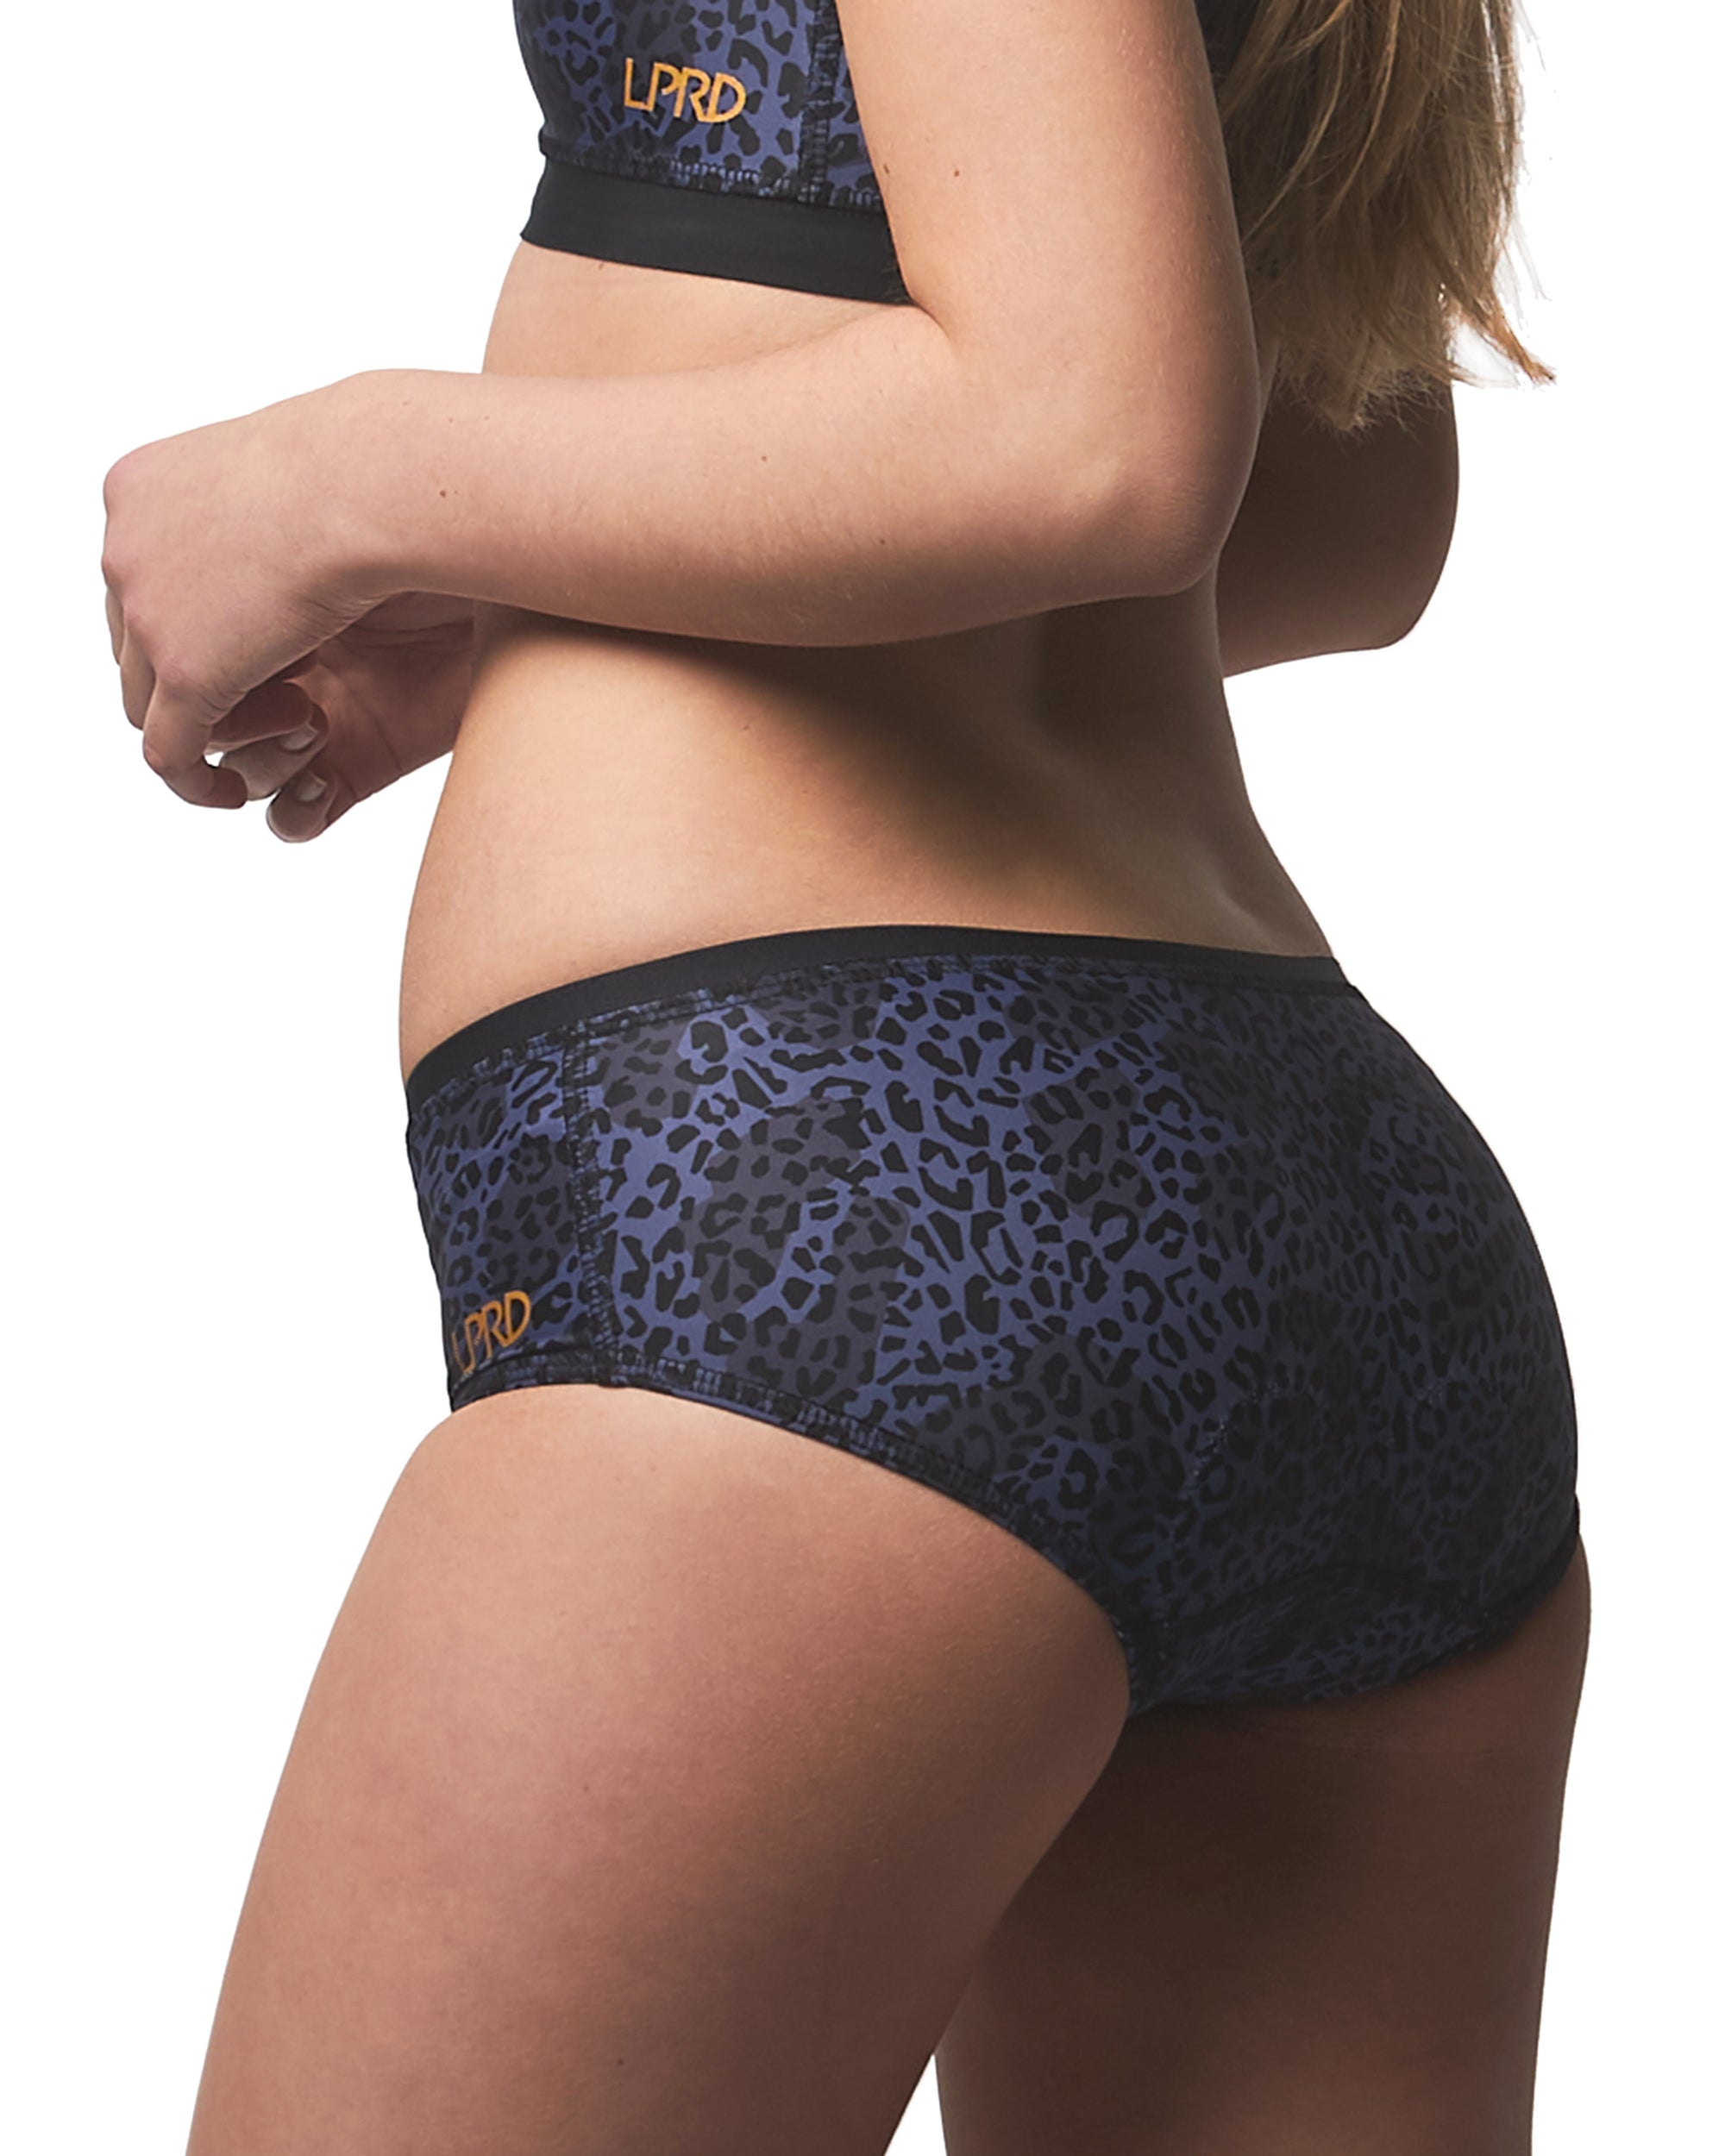 Padded cycling underwear for women - Black and blue leopard print